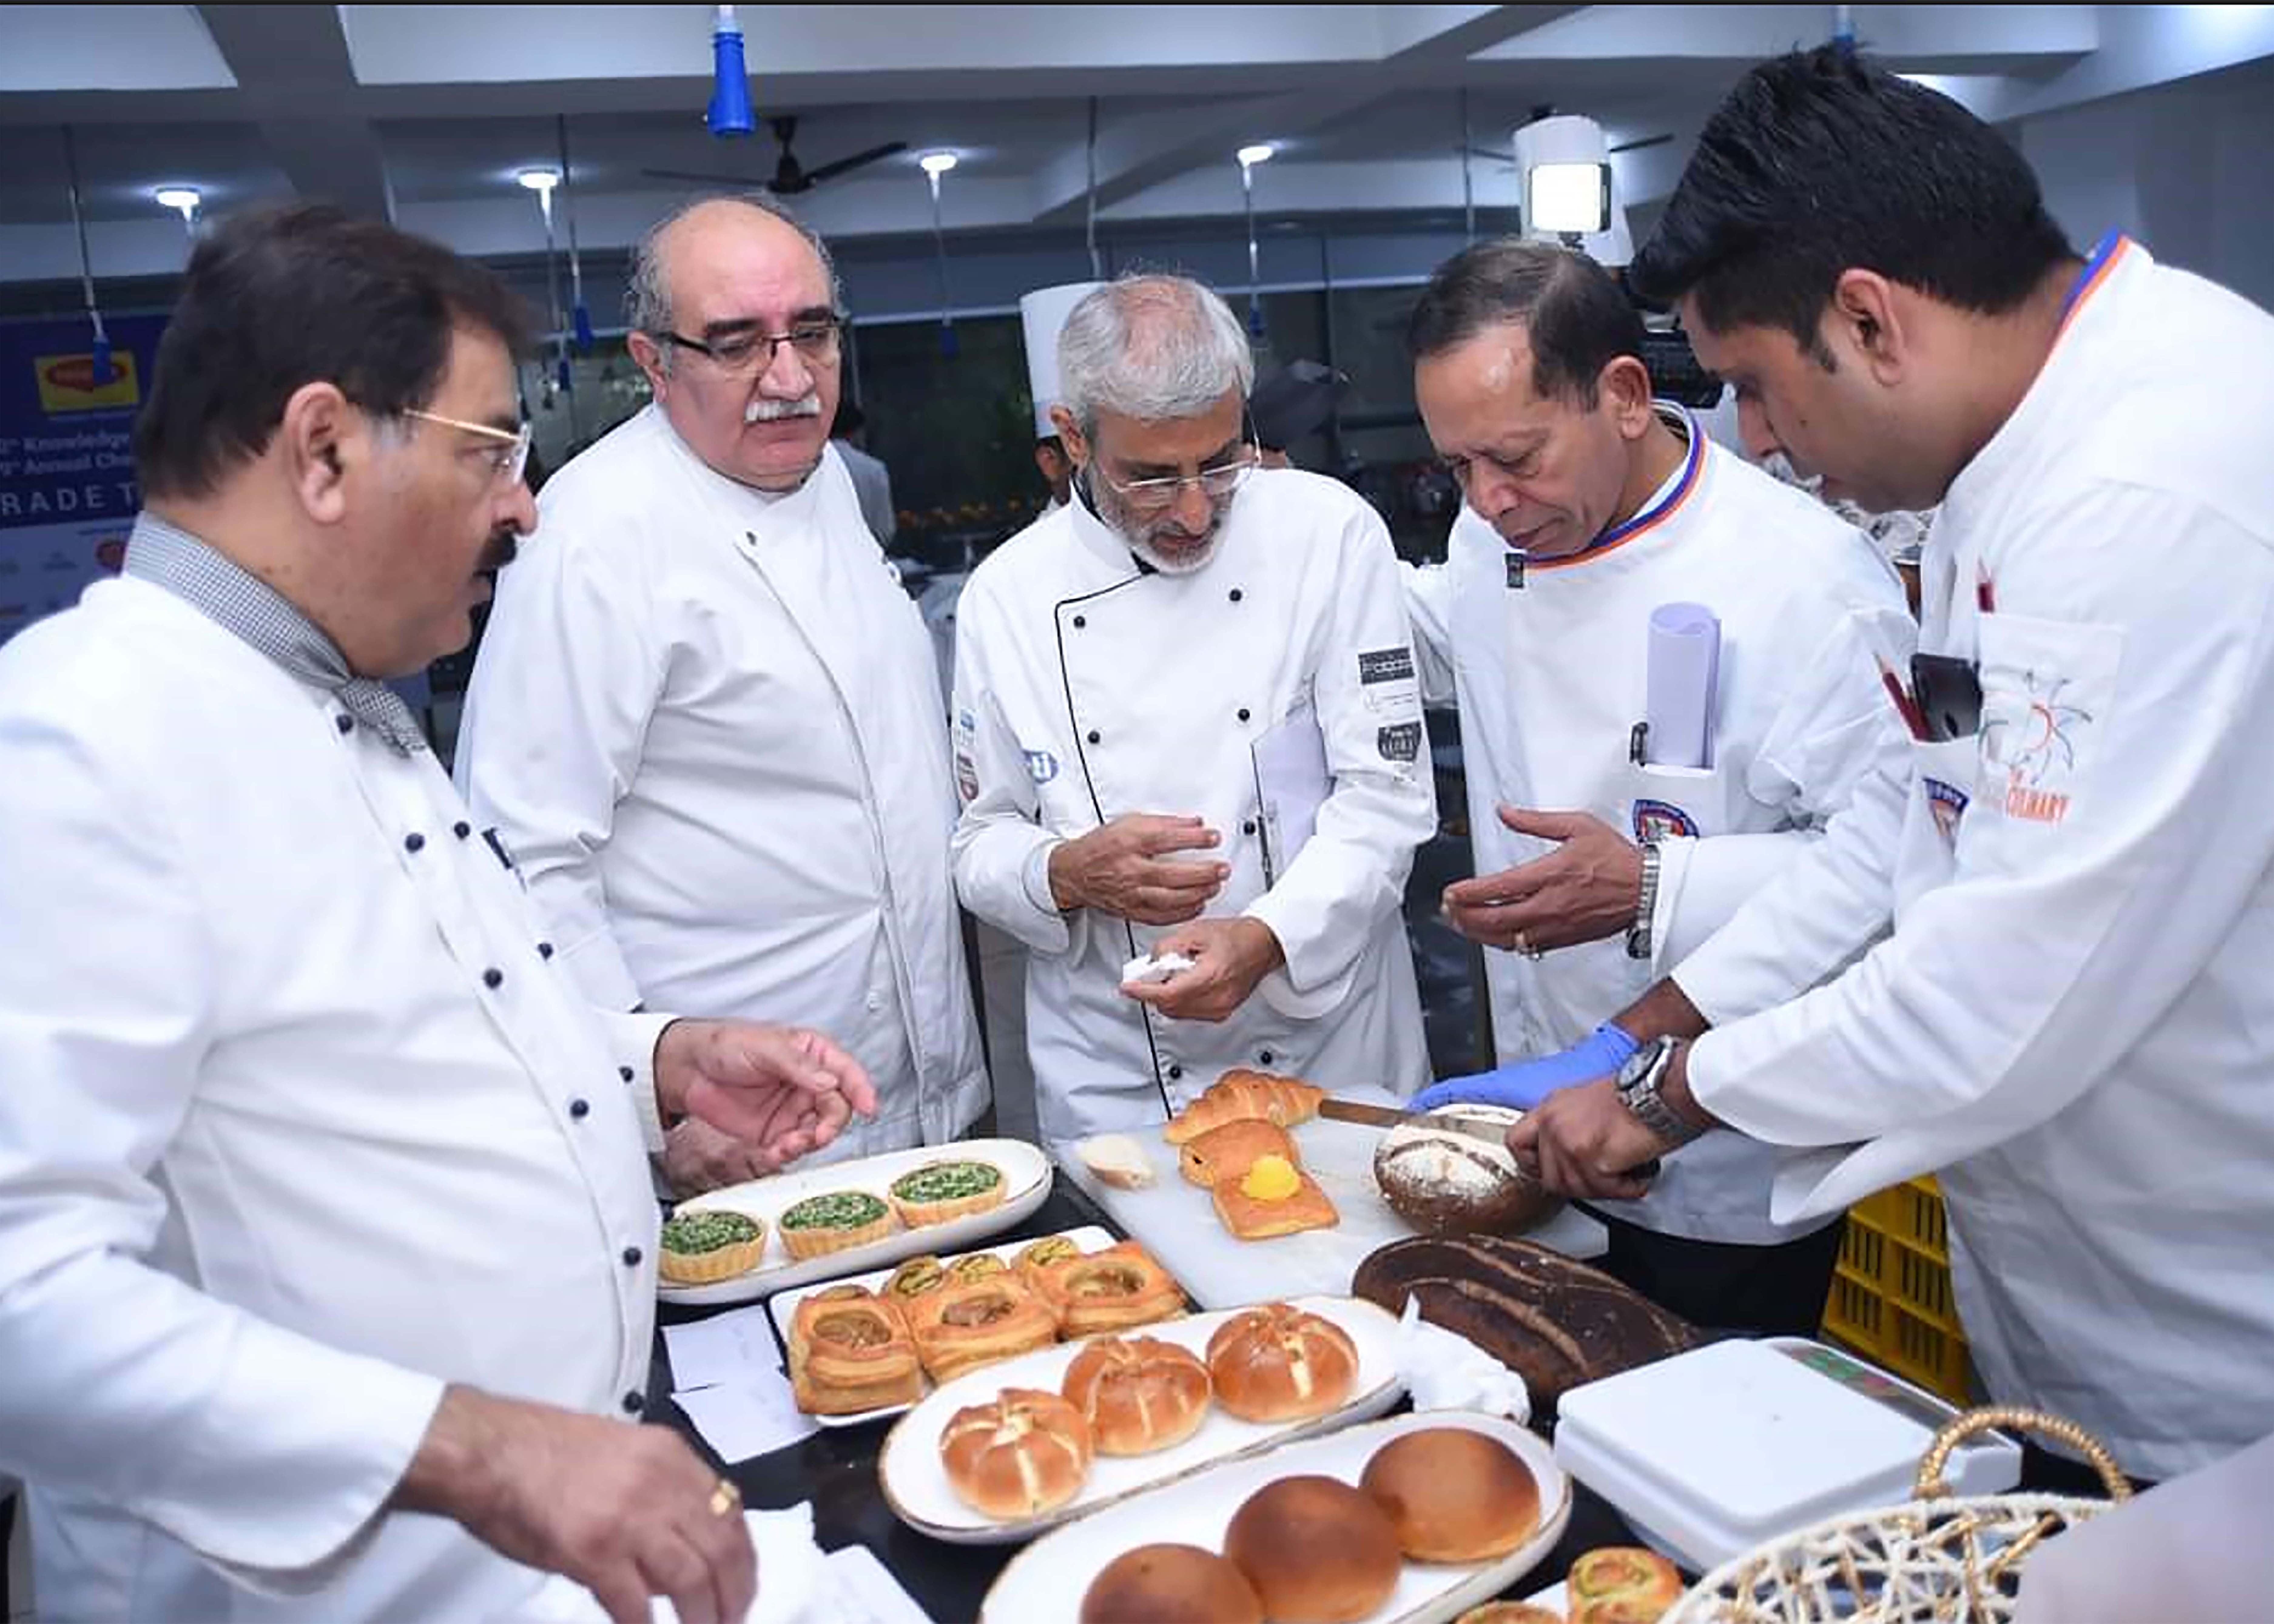 Chefs judging the culinary competition